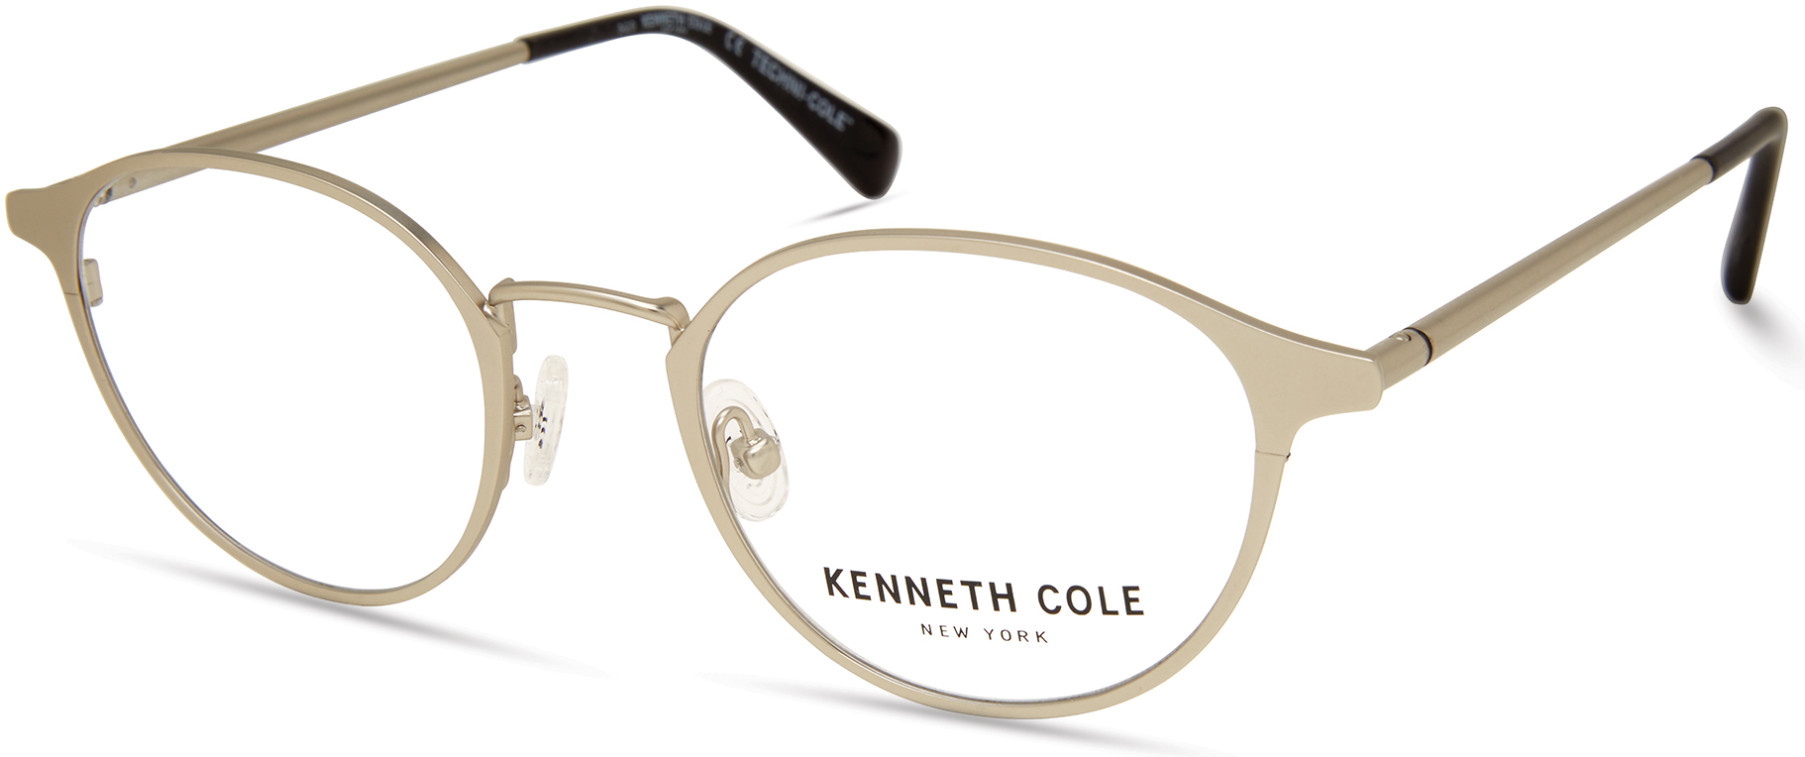 KENNETH COLE NY 0324 011